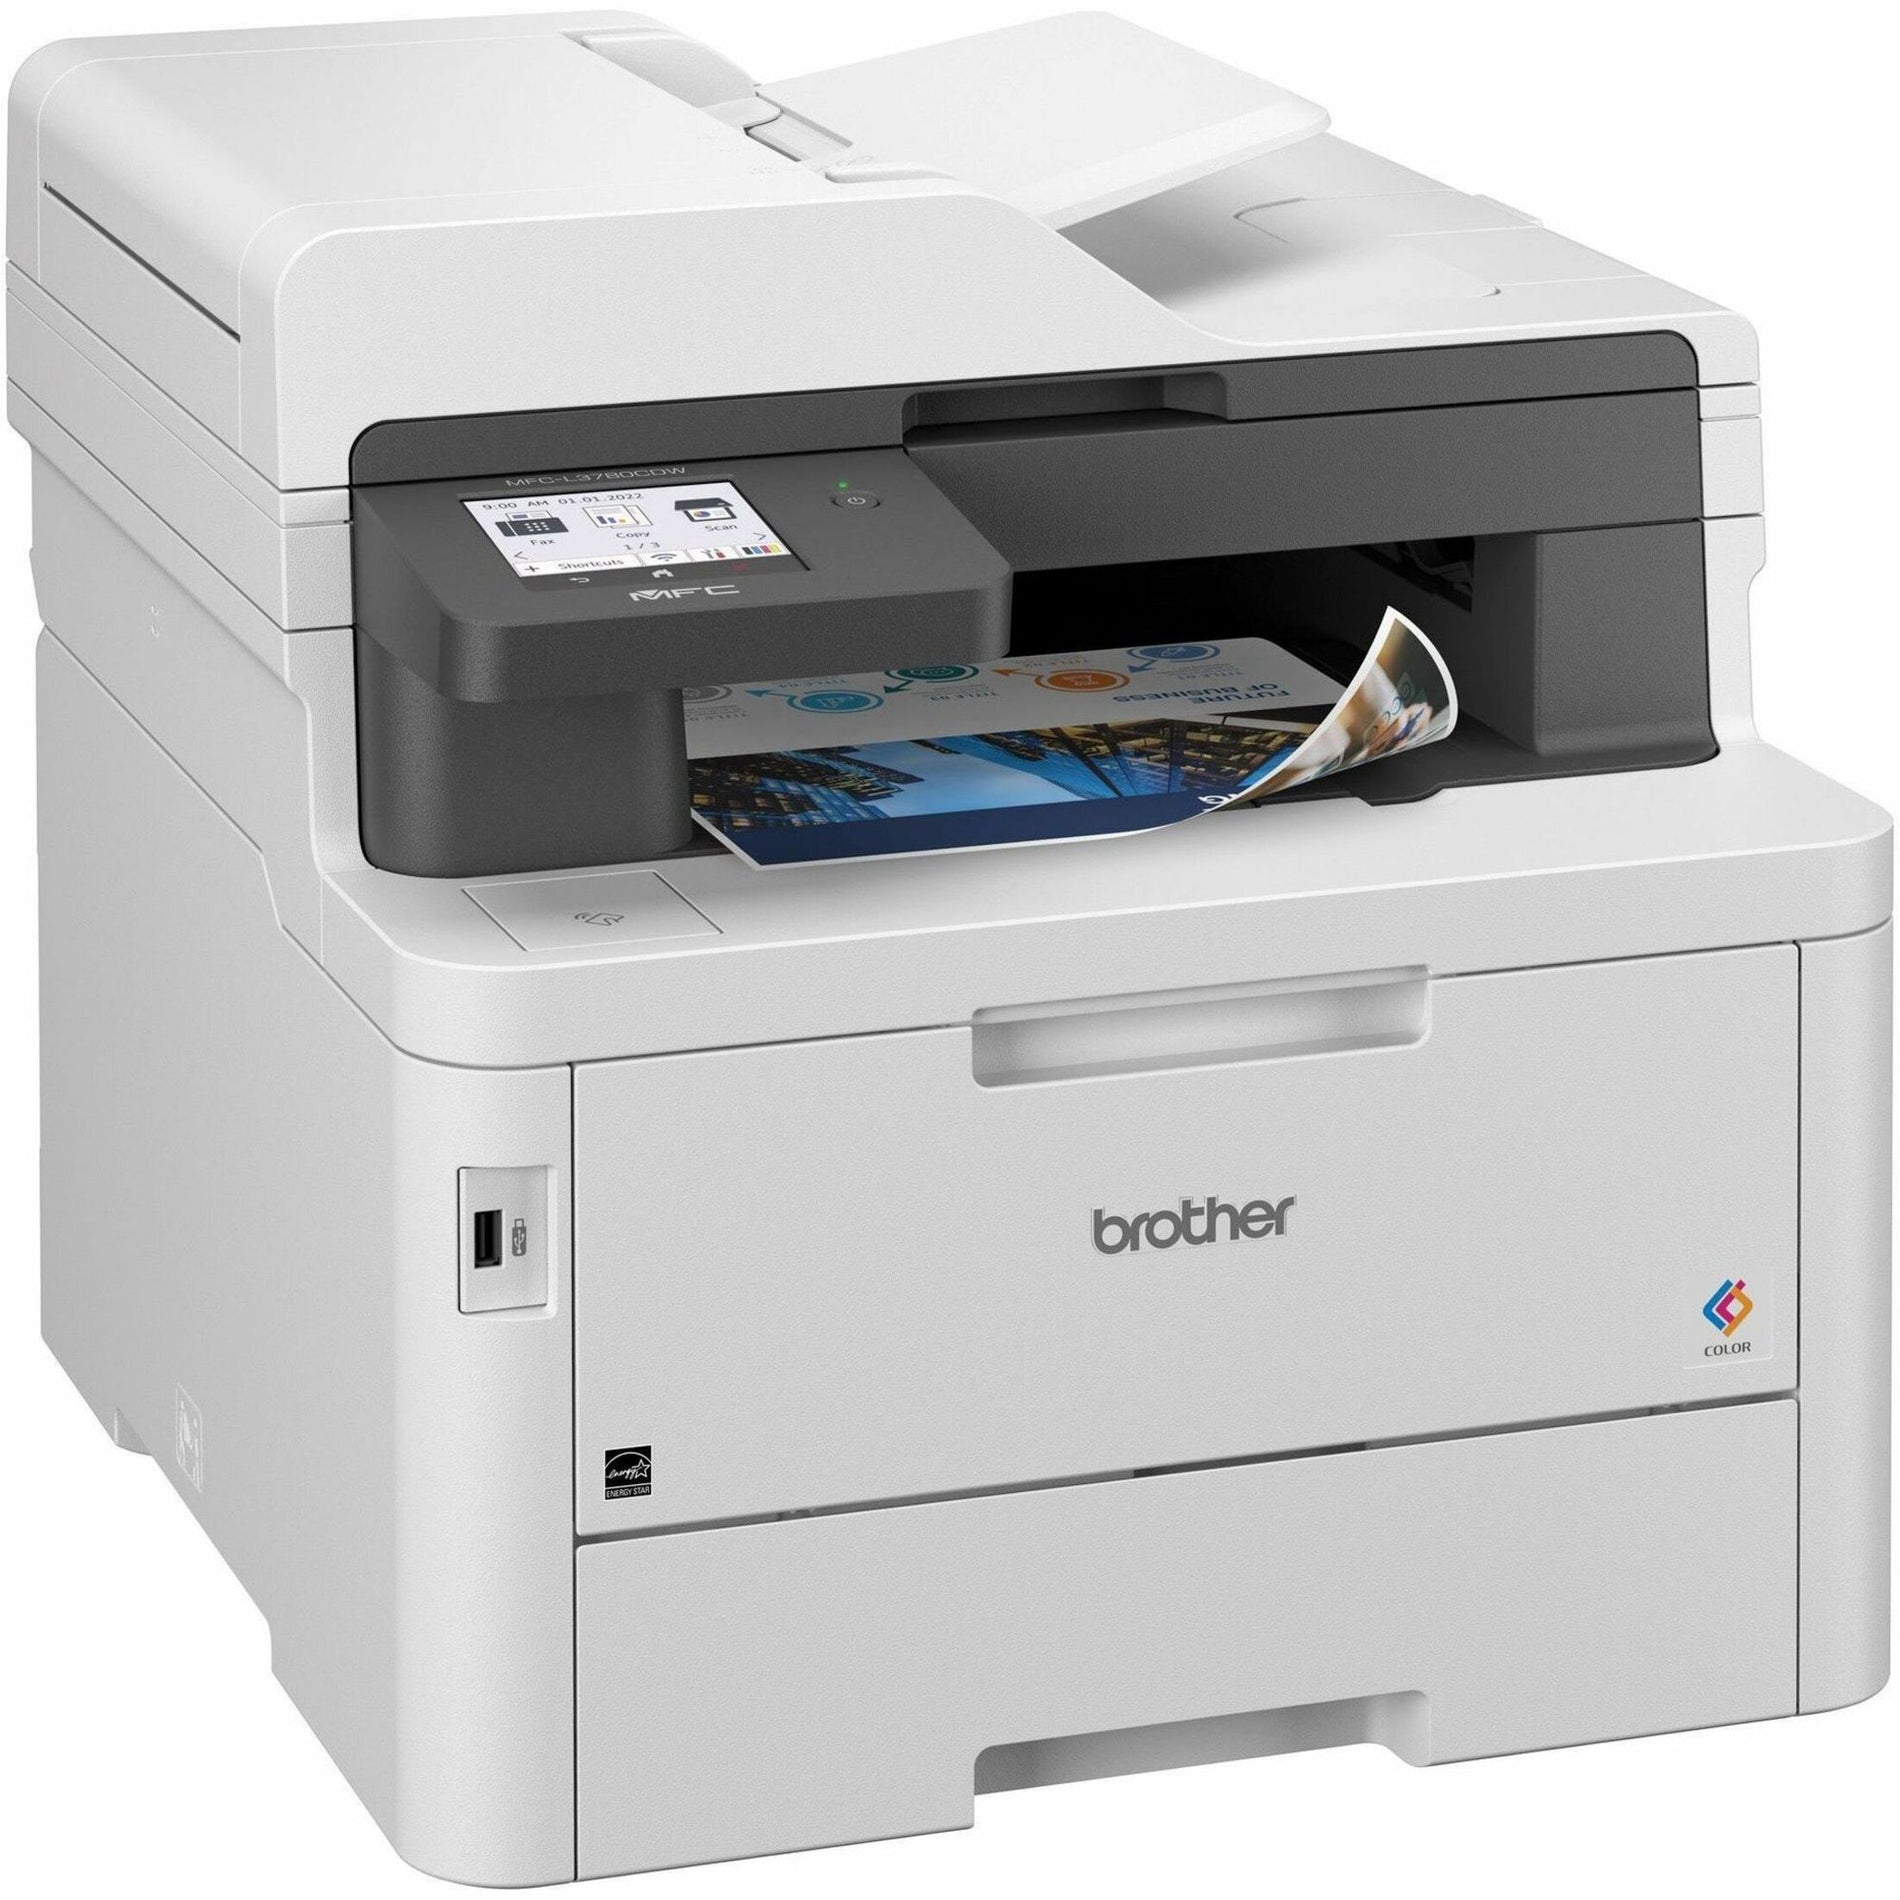 Brother MFC-L2717DW Monochrome Laser All-In-One Printer for sale online